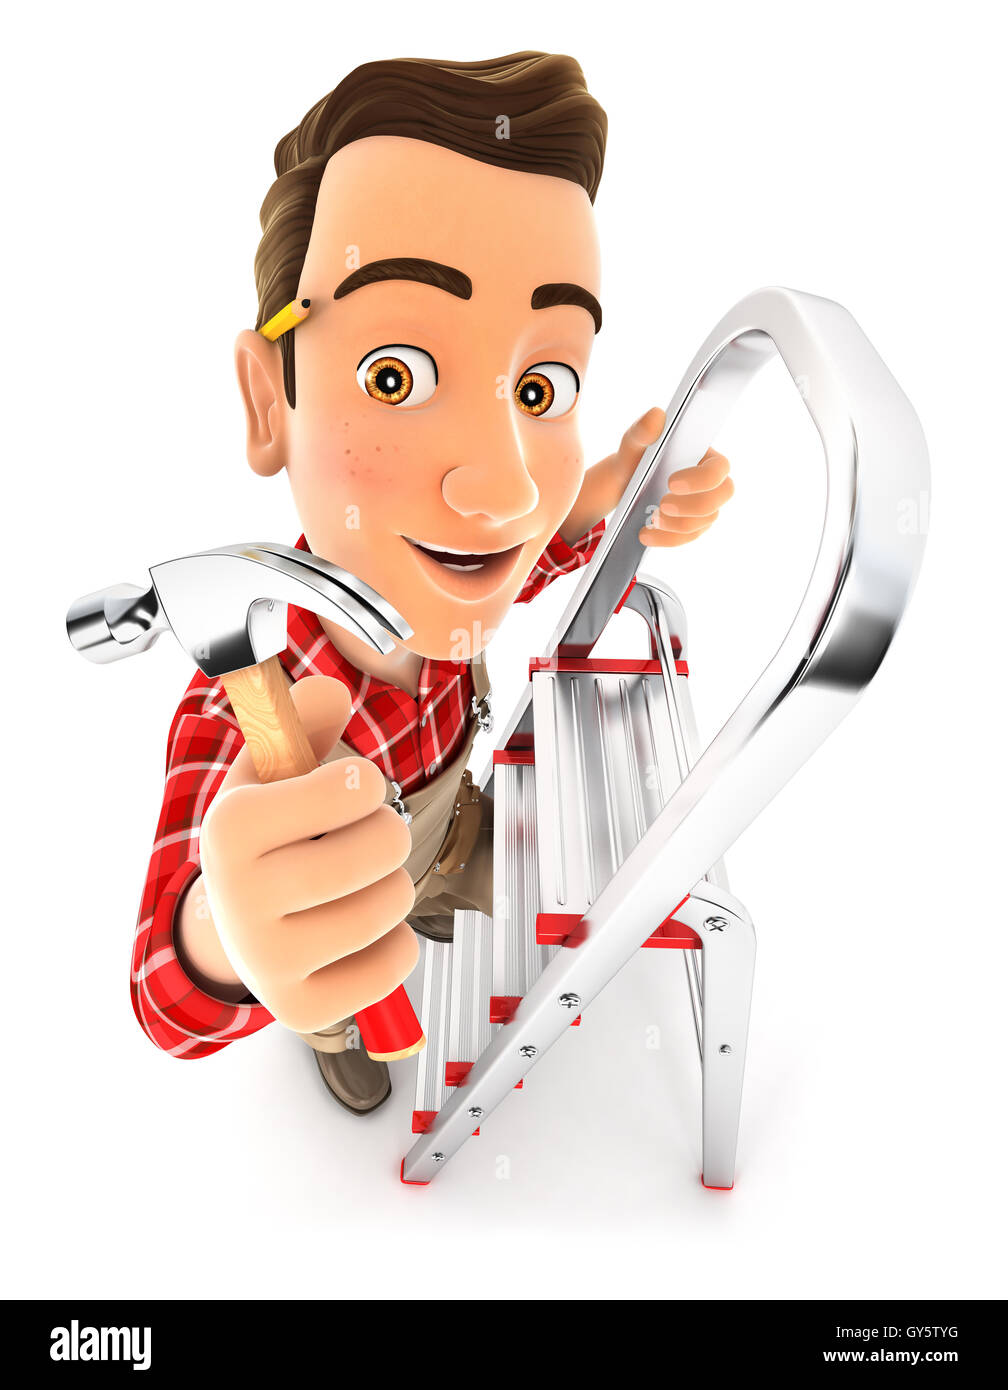 3d handyman on stepladder with claw hammer, illustration with isolated white background Stock Photo